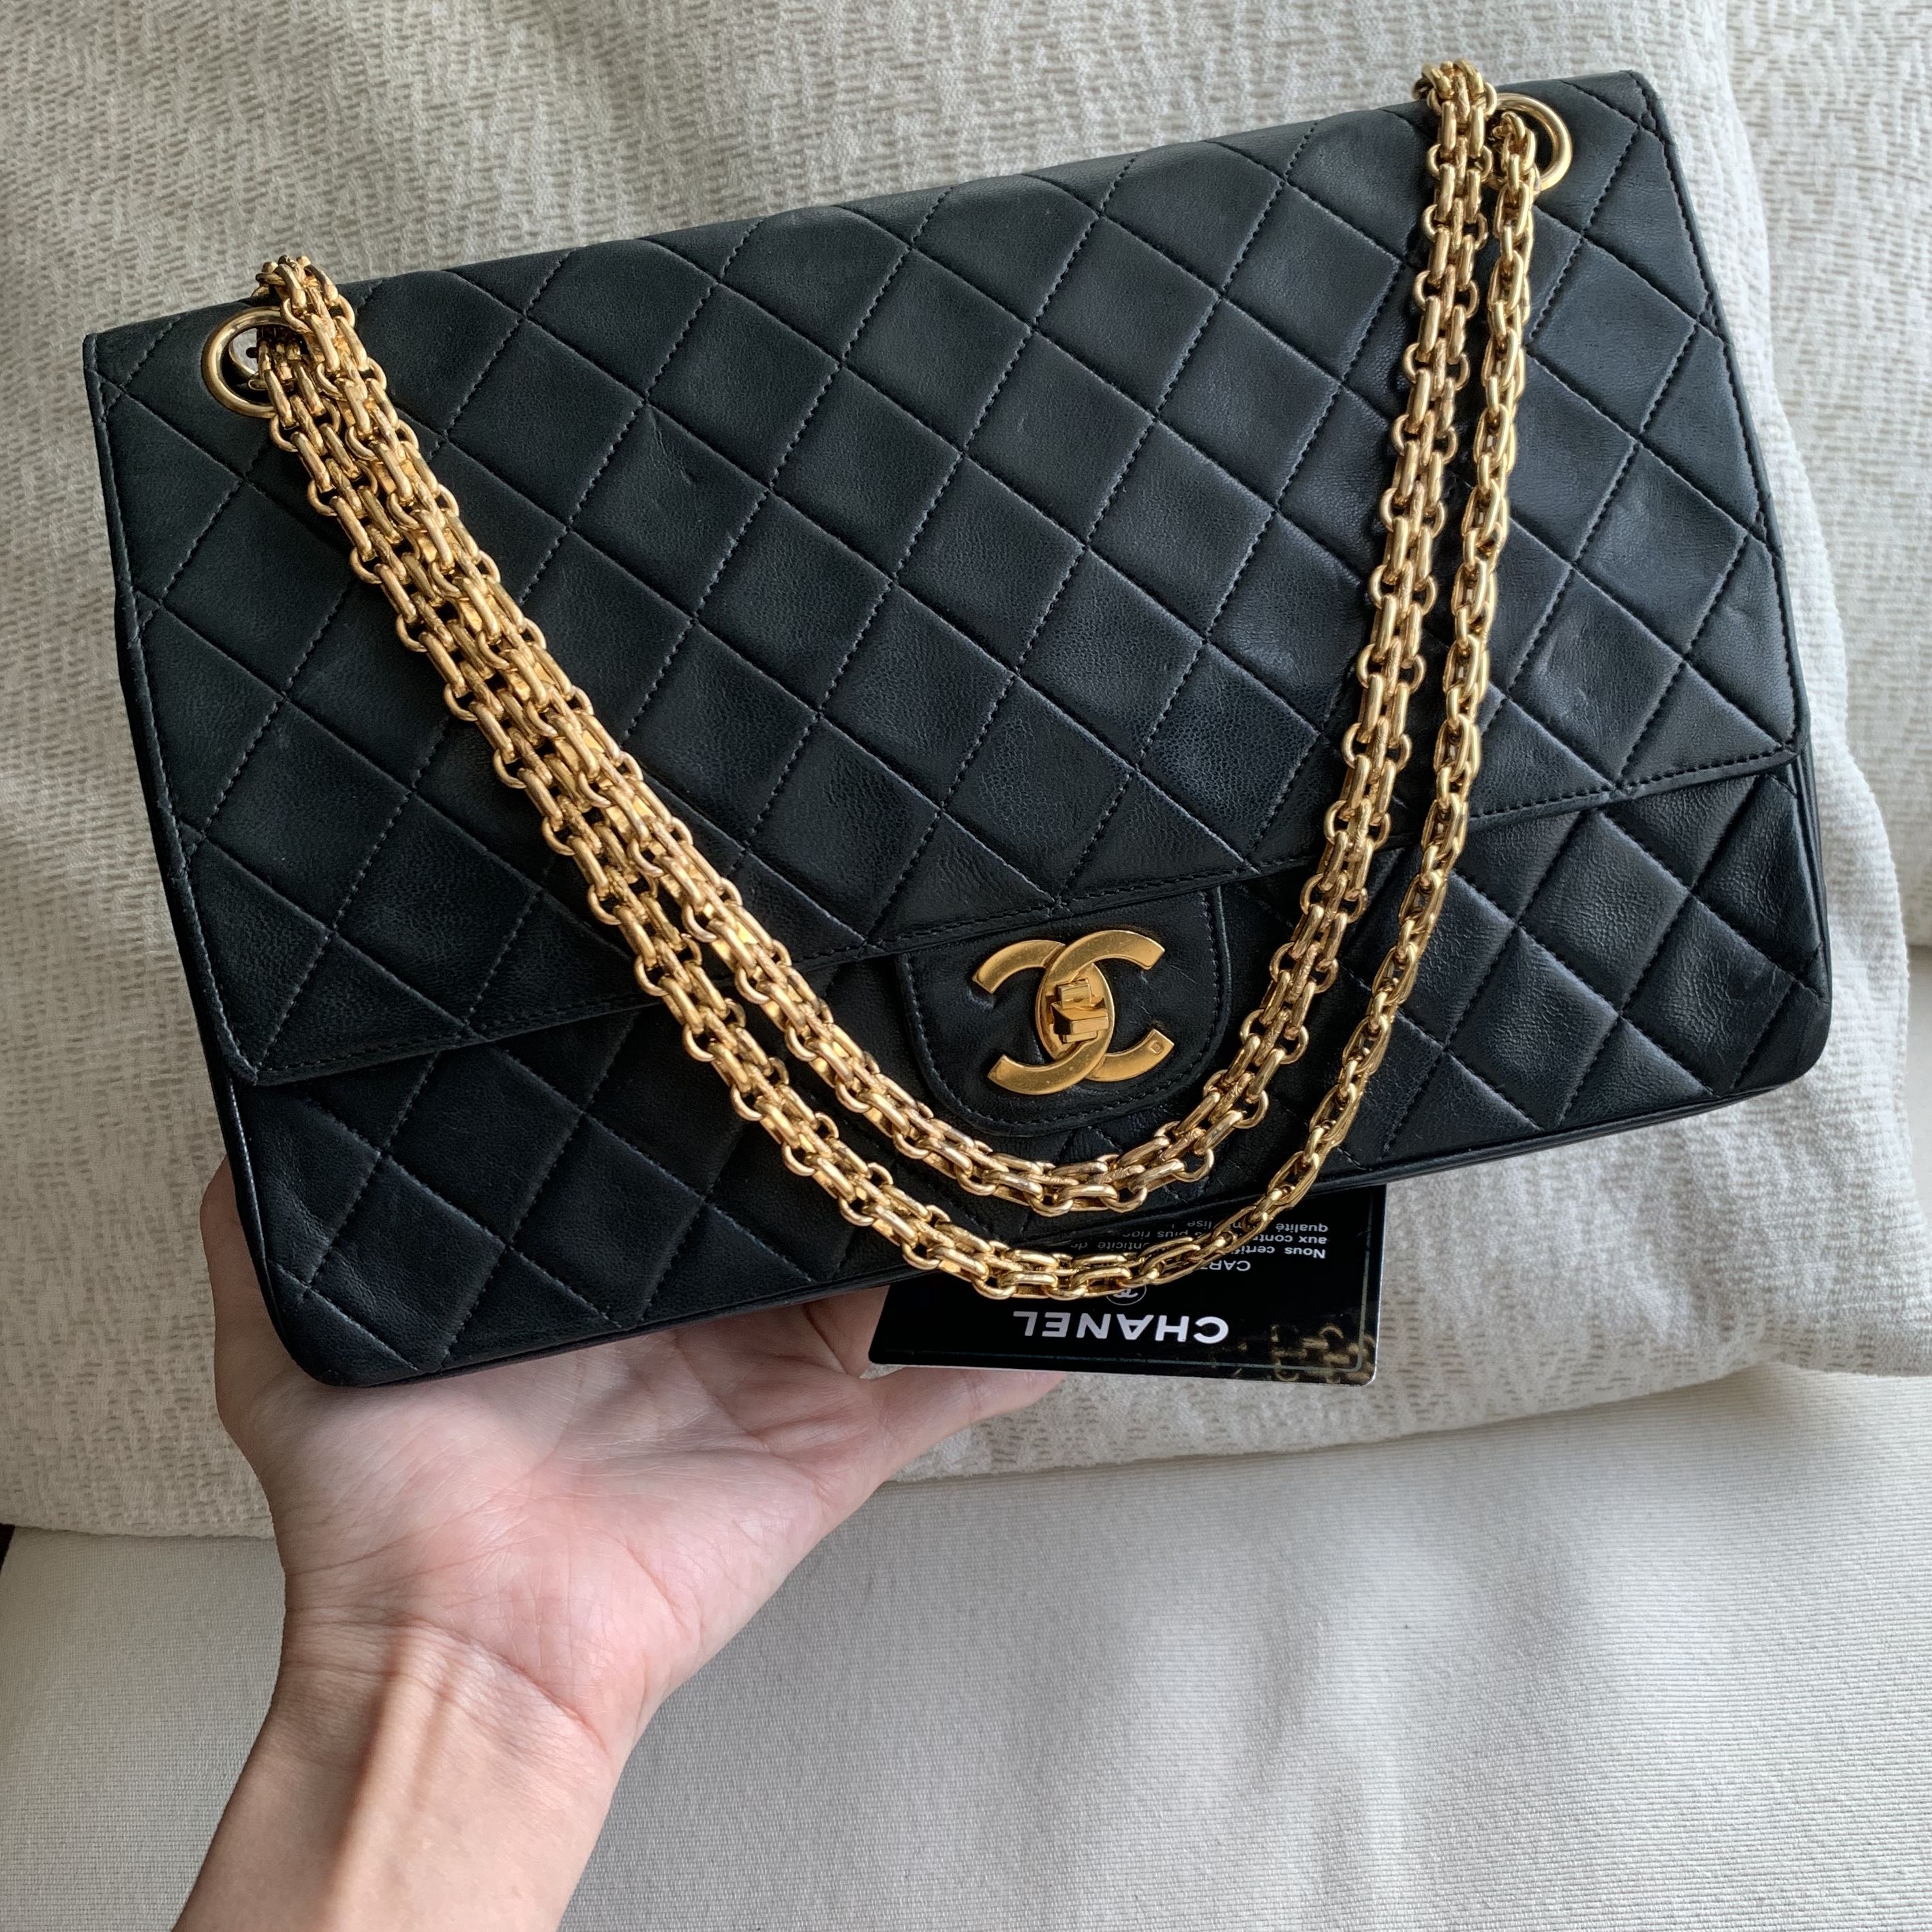 AUTHENTIC CHANEL 10.5 Classic Flap Bag with Mademoiselle Reissue